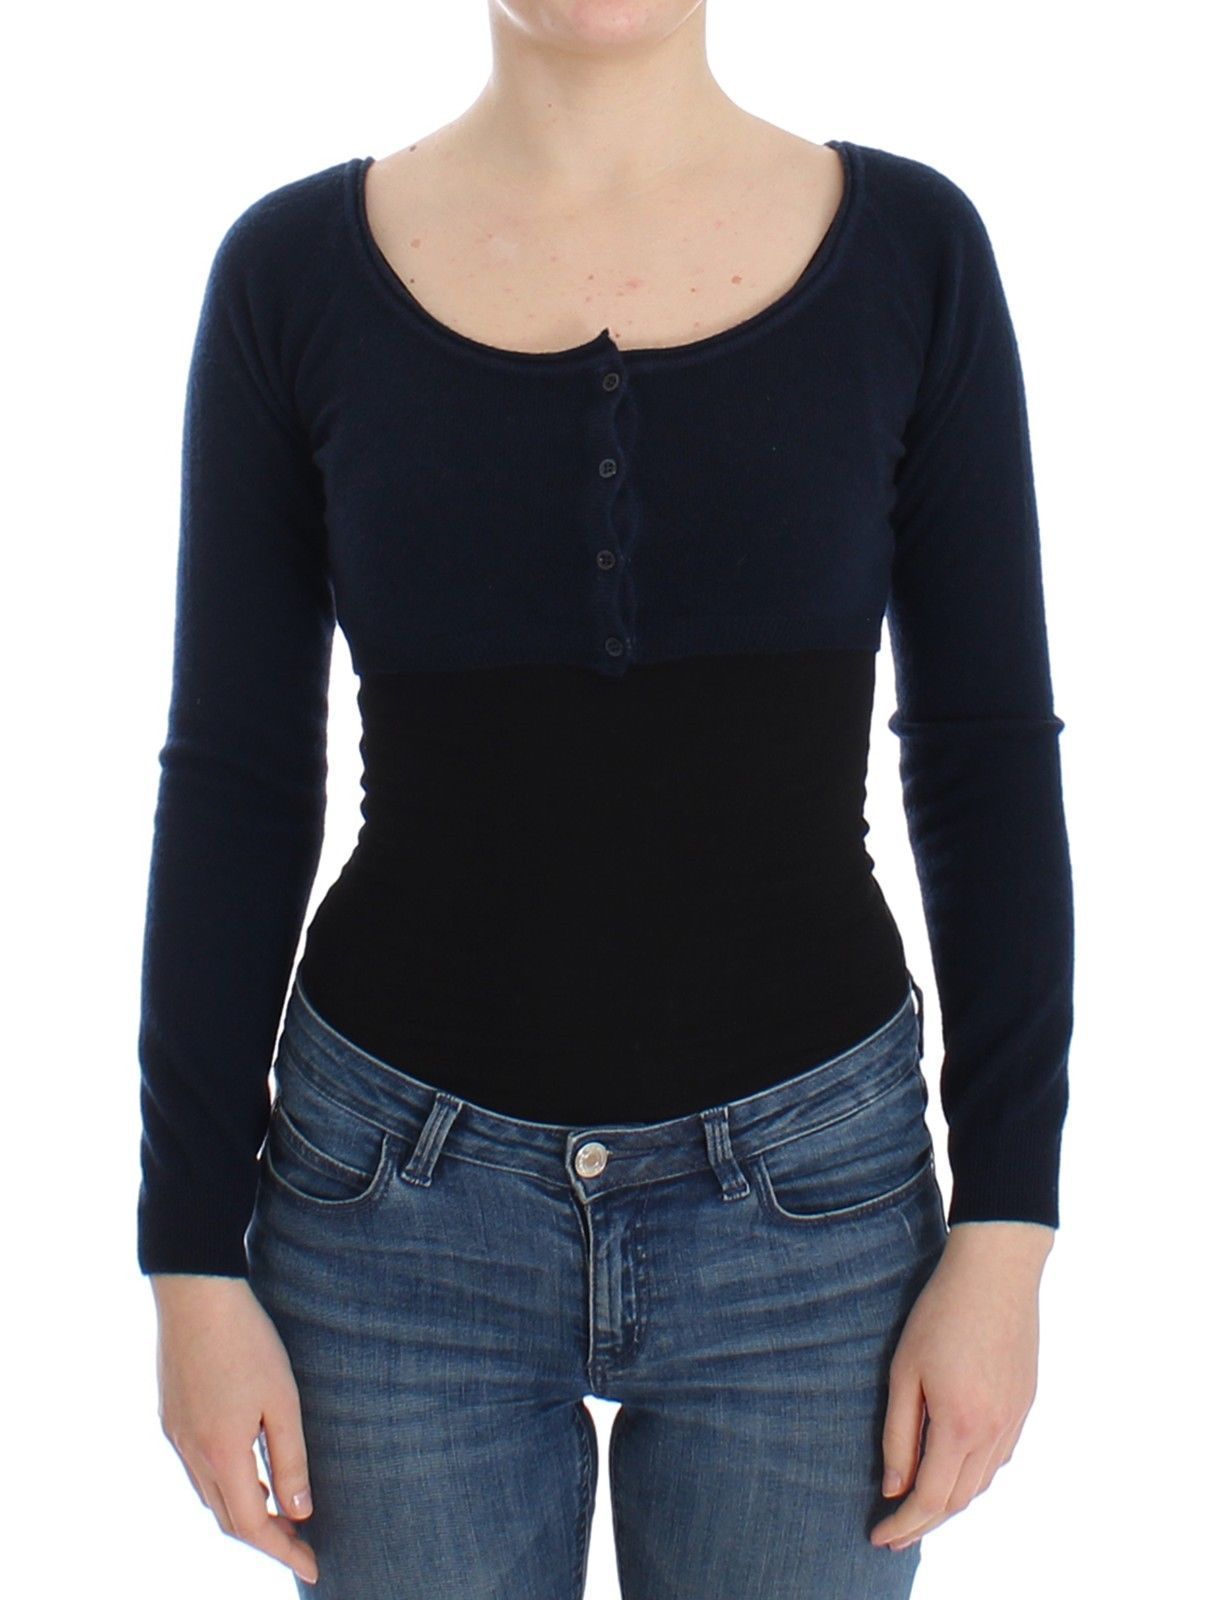 Lingerie Blue Cashmere Wool Sweater Top - Fashion